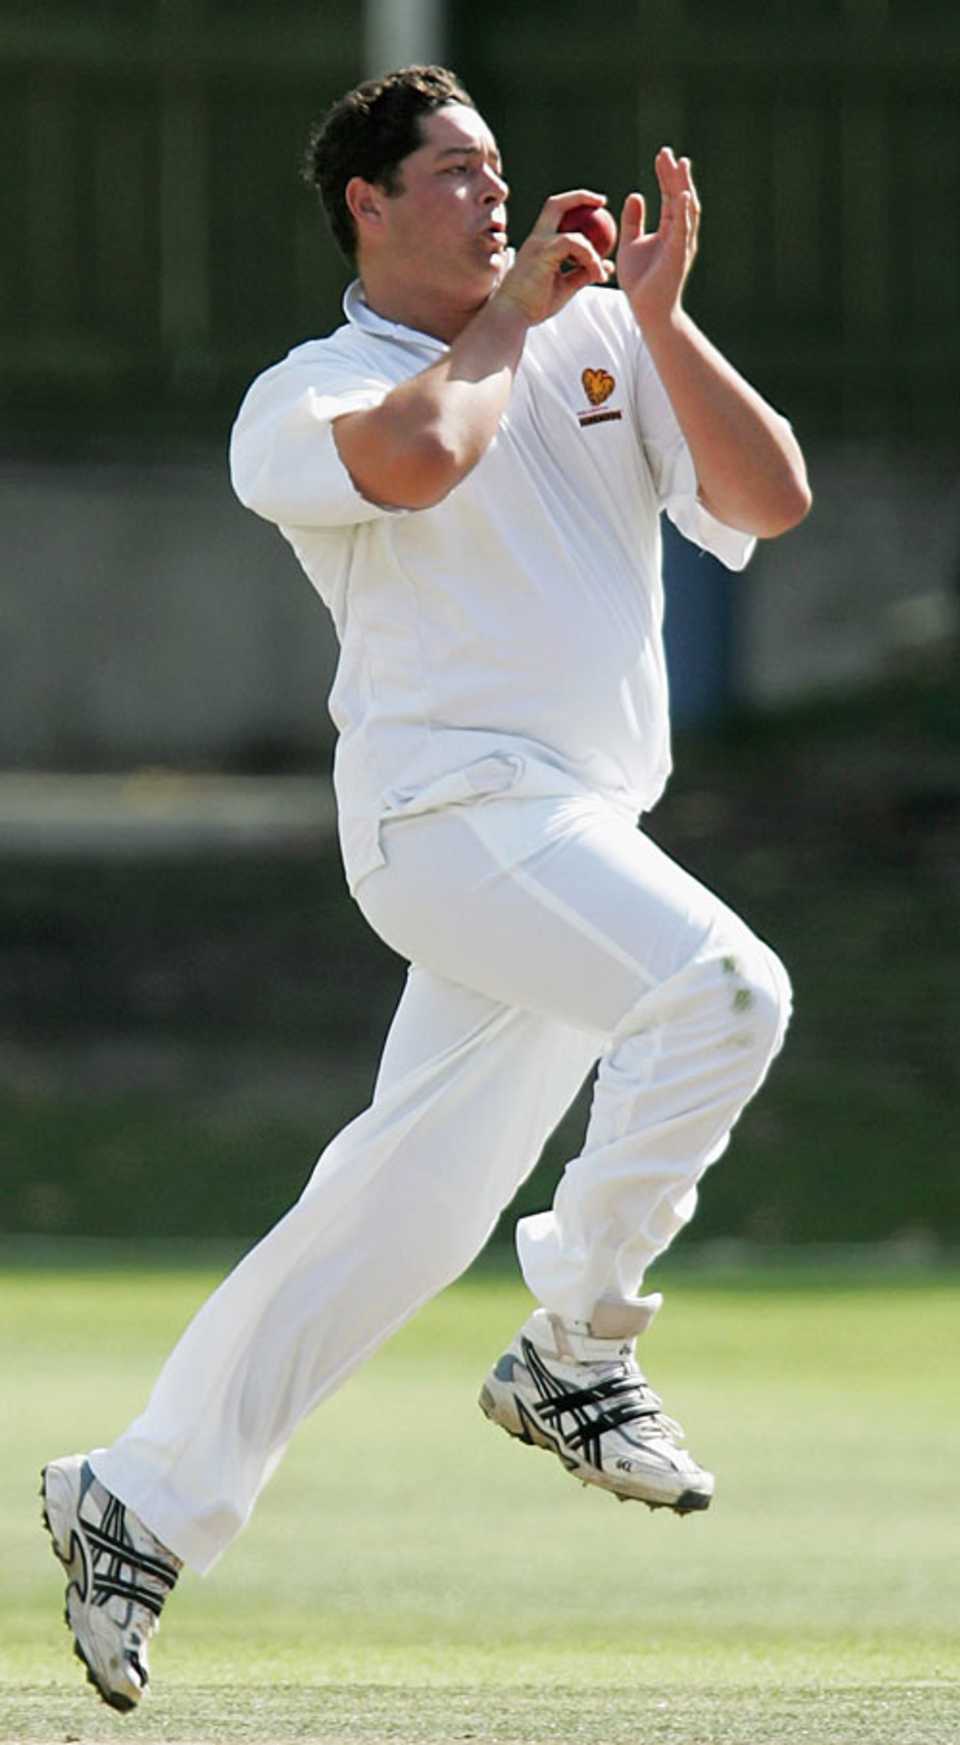 Jesse Ryder approaches his delivery stride, Wellington v Auckland, State Shield, March 20, 2006